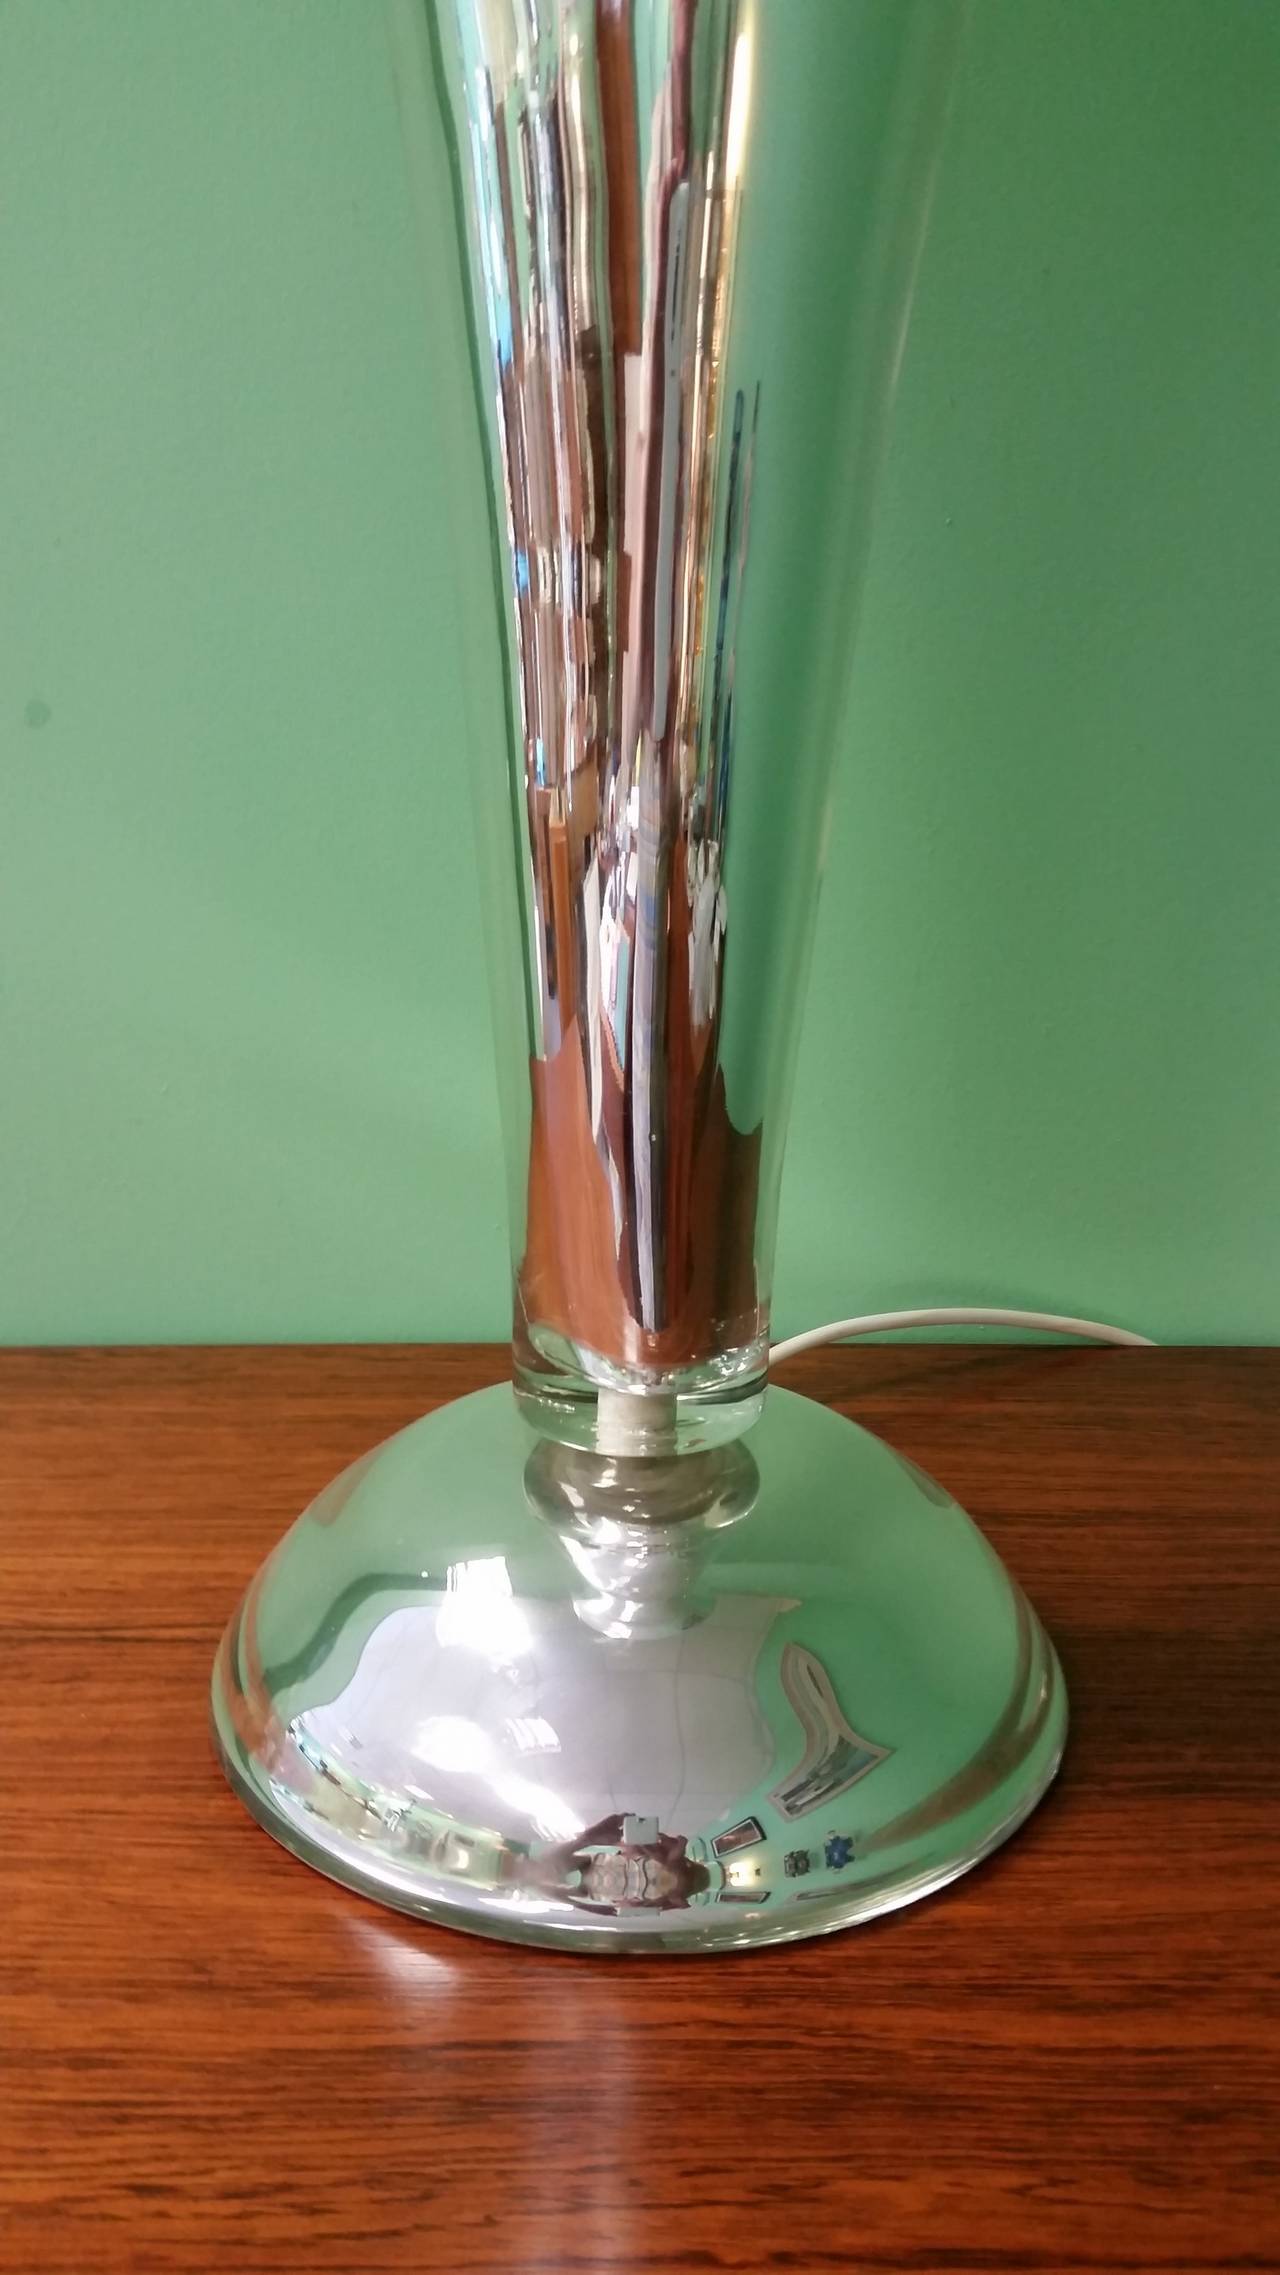 Amazing Art Deco Mirrored Uplighter. 
This Superb Mirrored Table Lamp uplighter is just stunning with its rippled Mirror Glass finish. 
72 cm h 39 cm w 39 cm d 
British C 1930